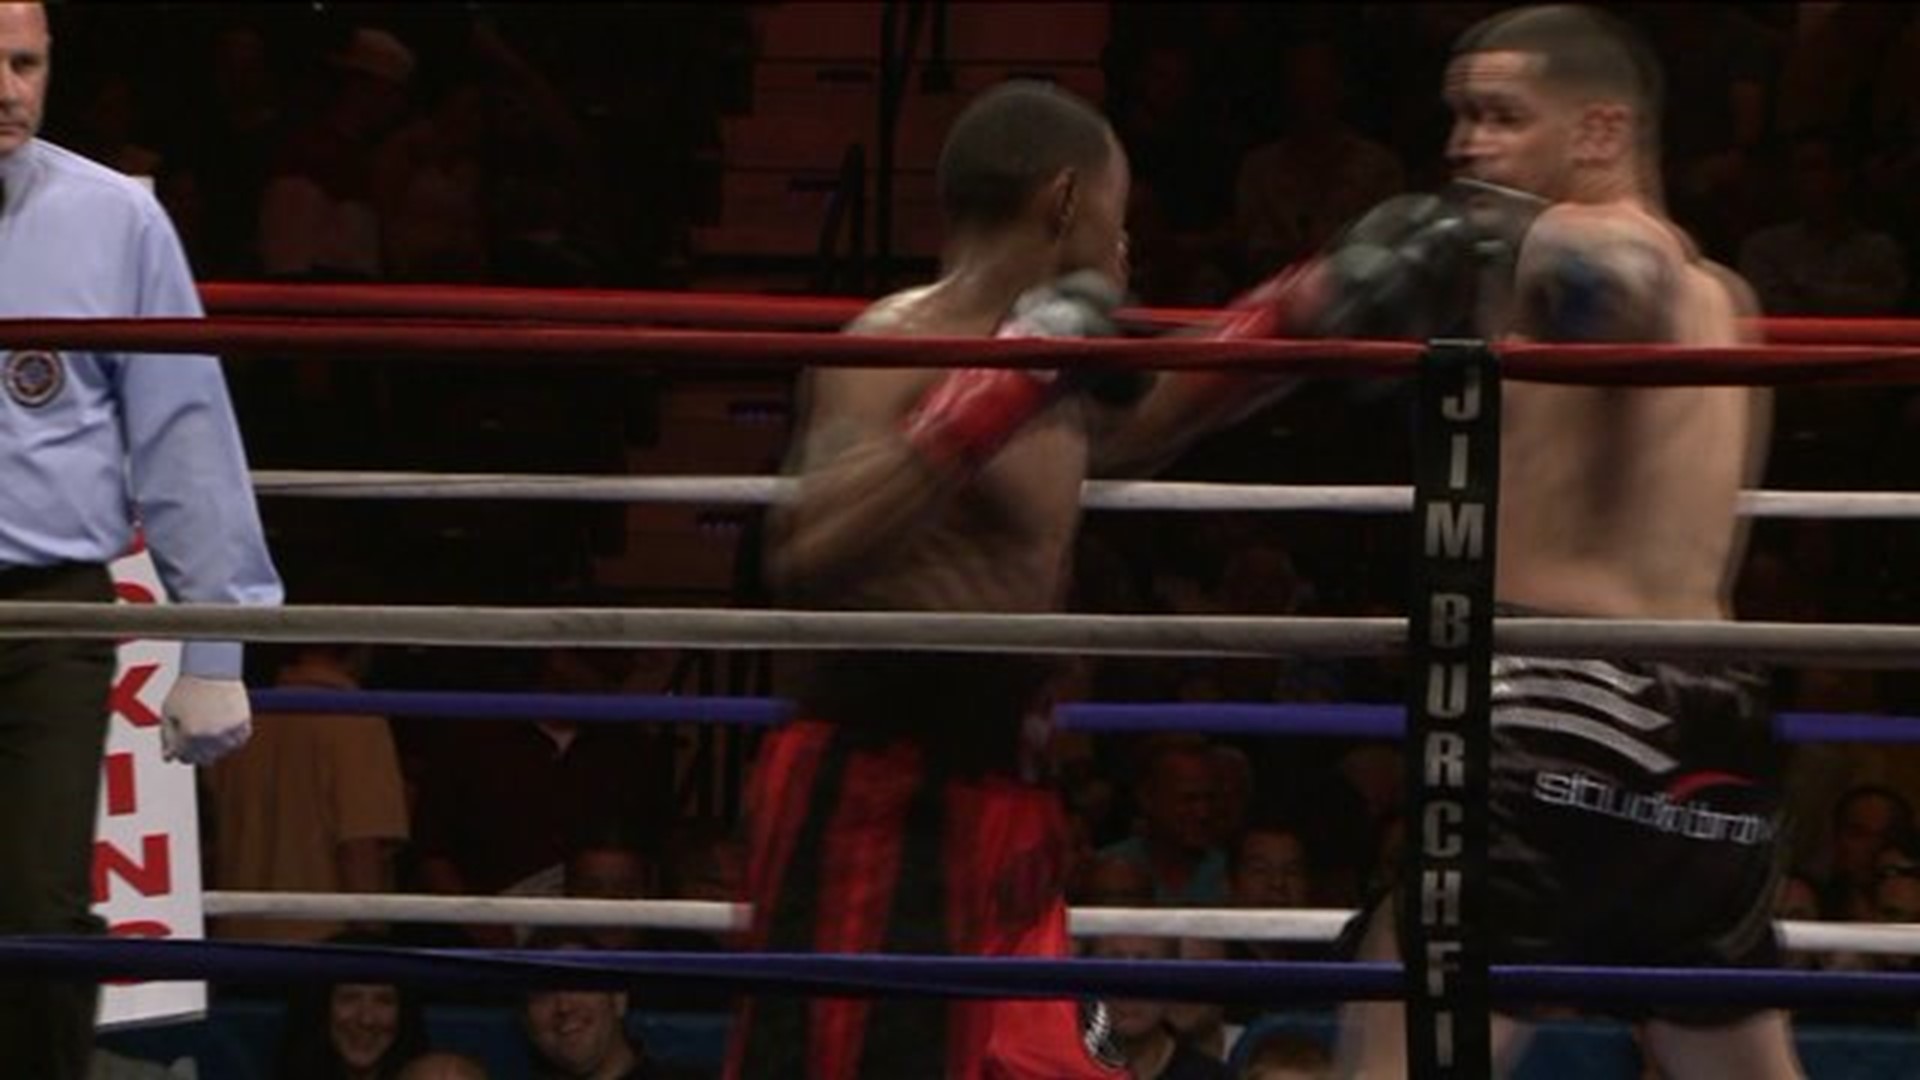 Connecticut boxer set to add win to his record